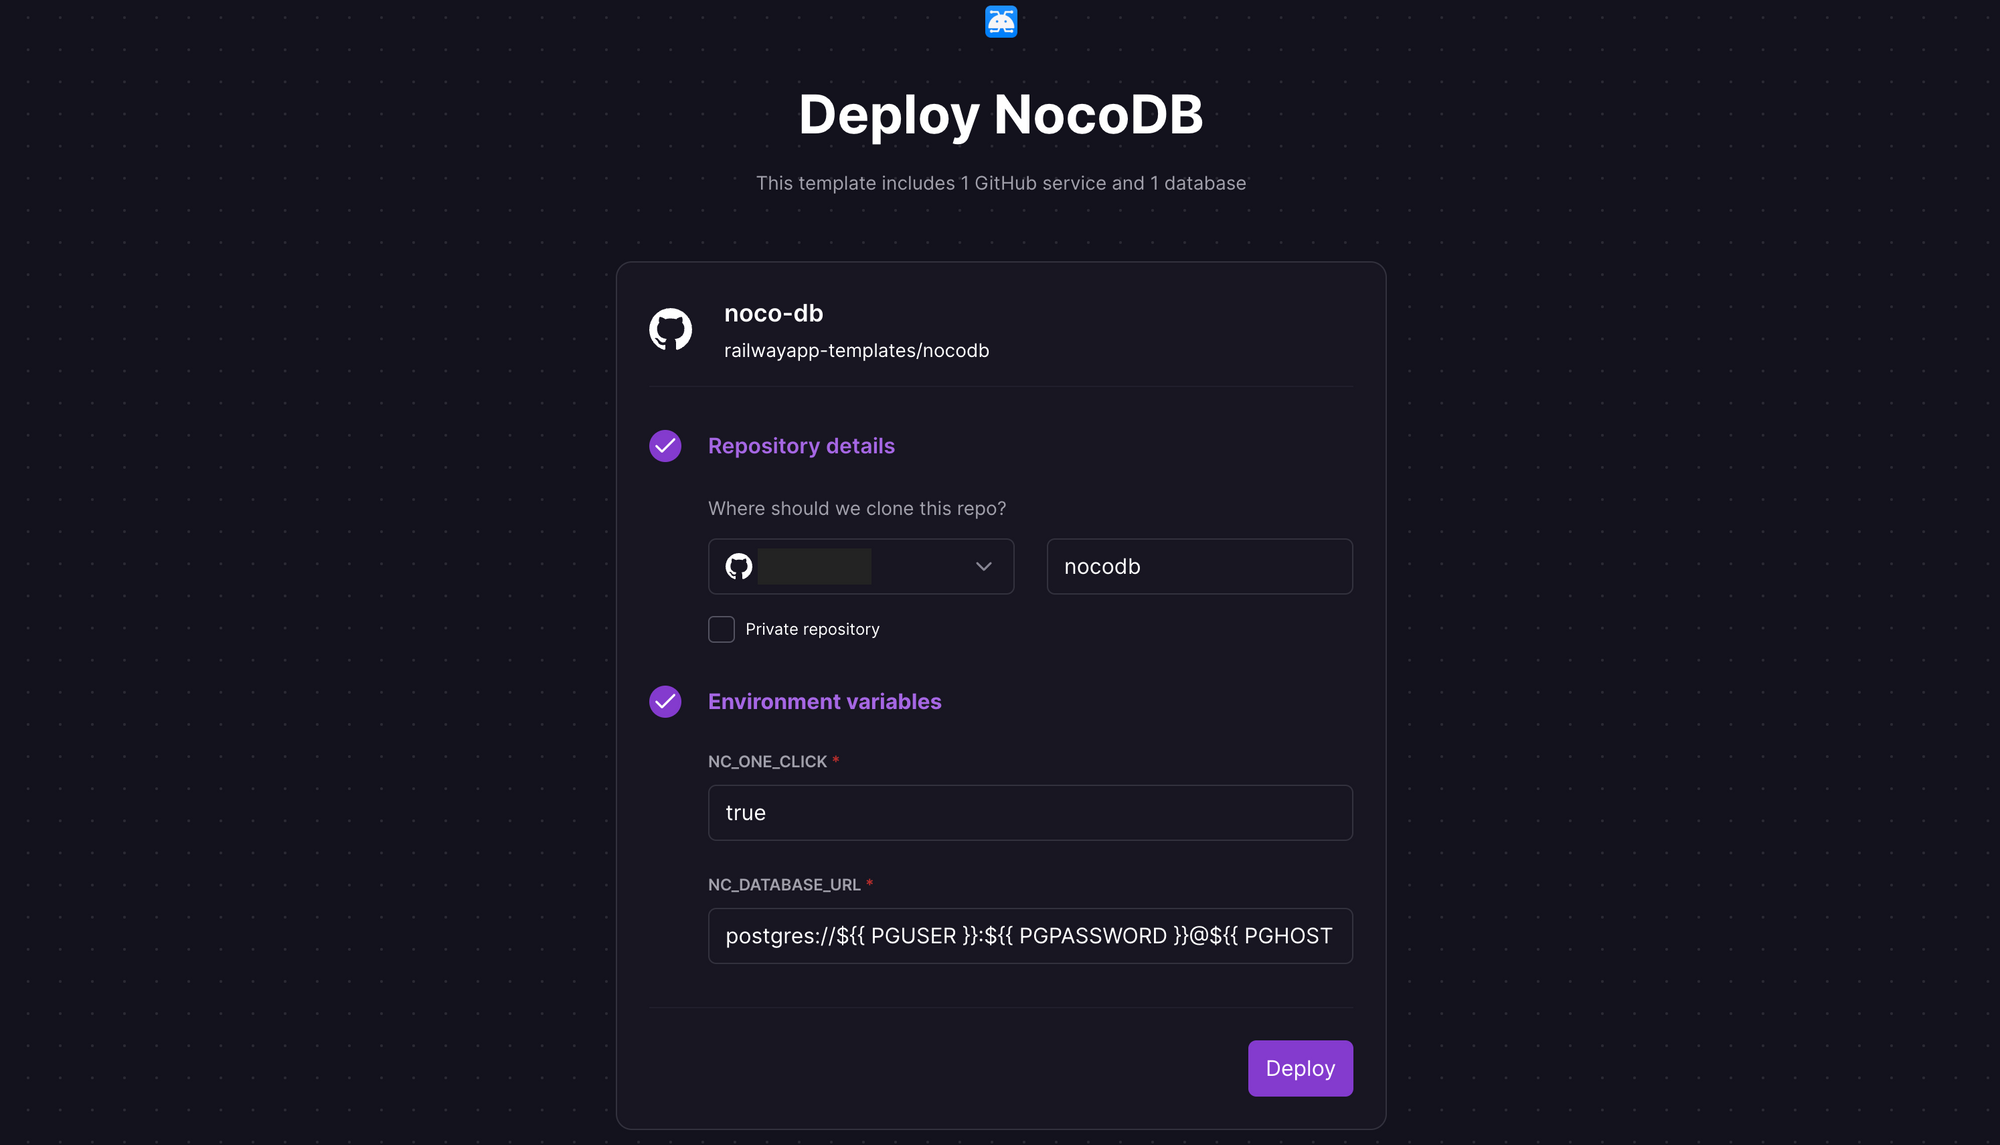 Deploy NocoDB using the one-click starter template